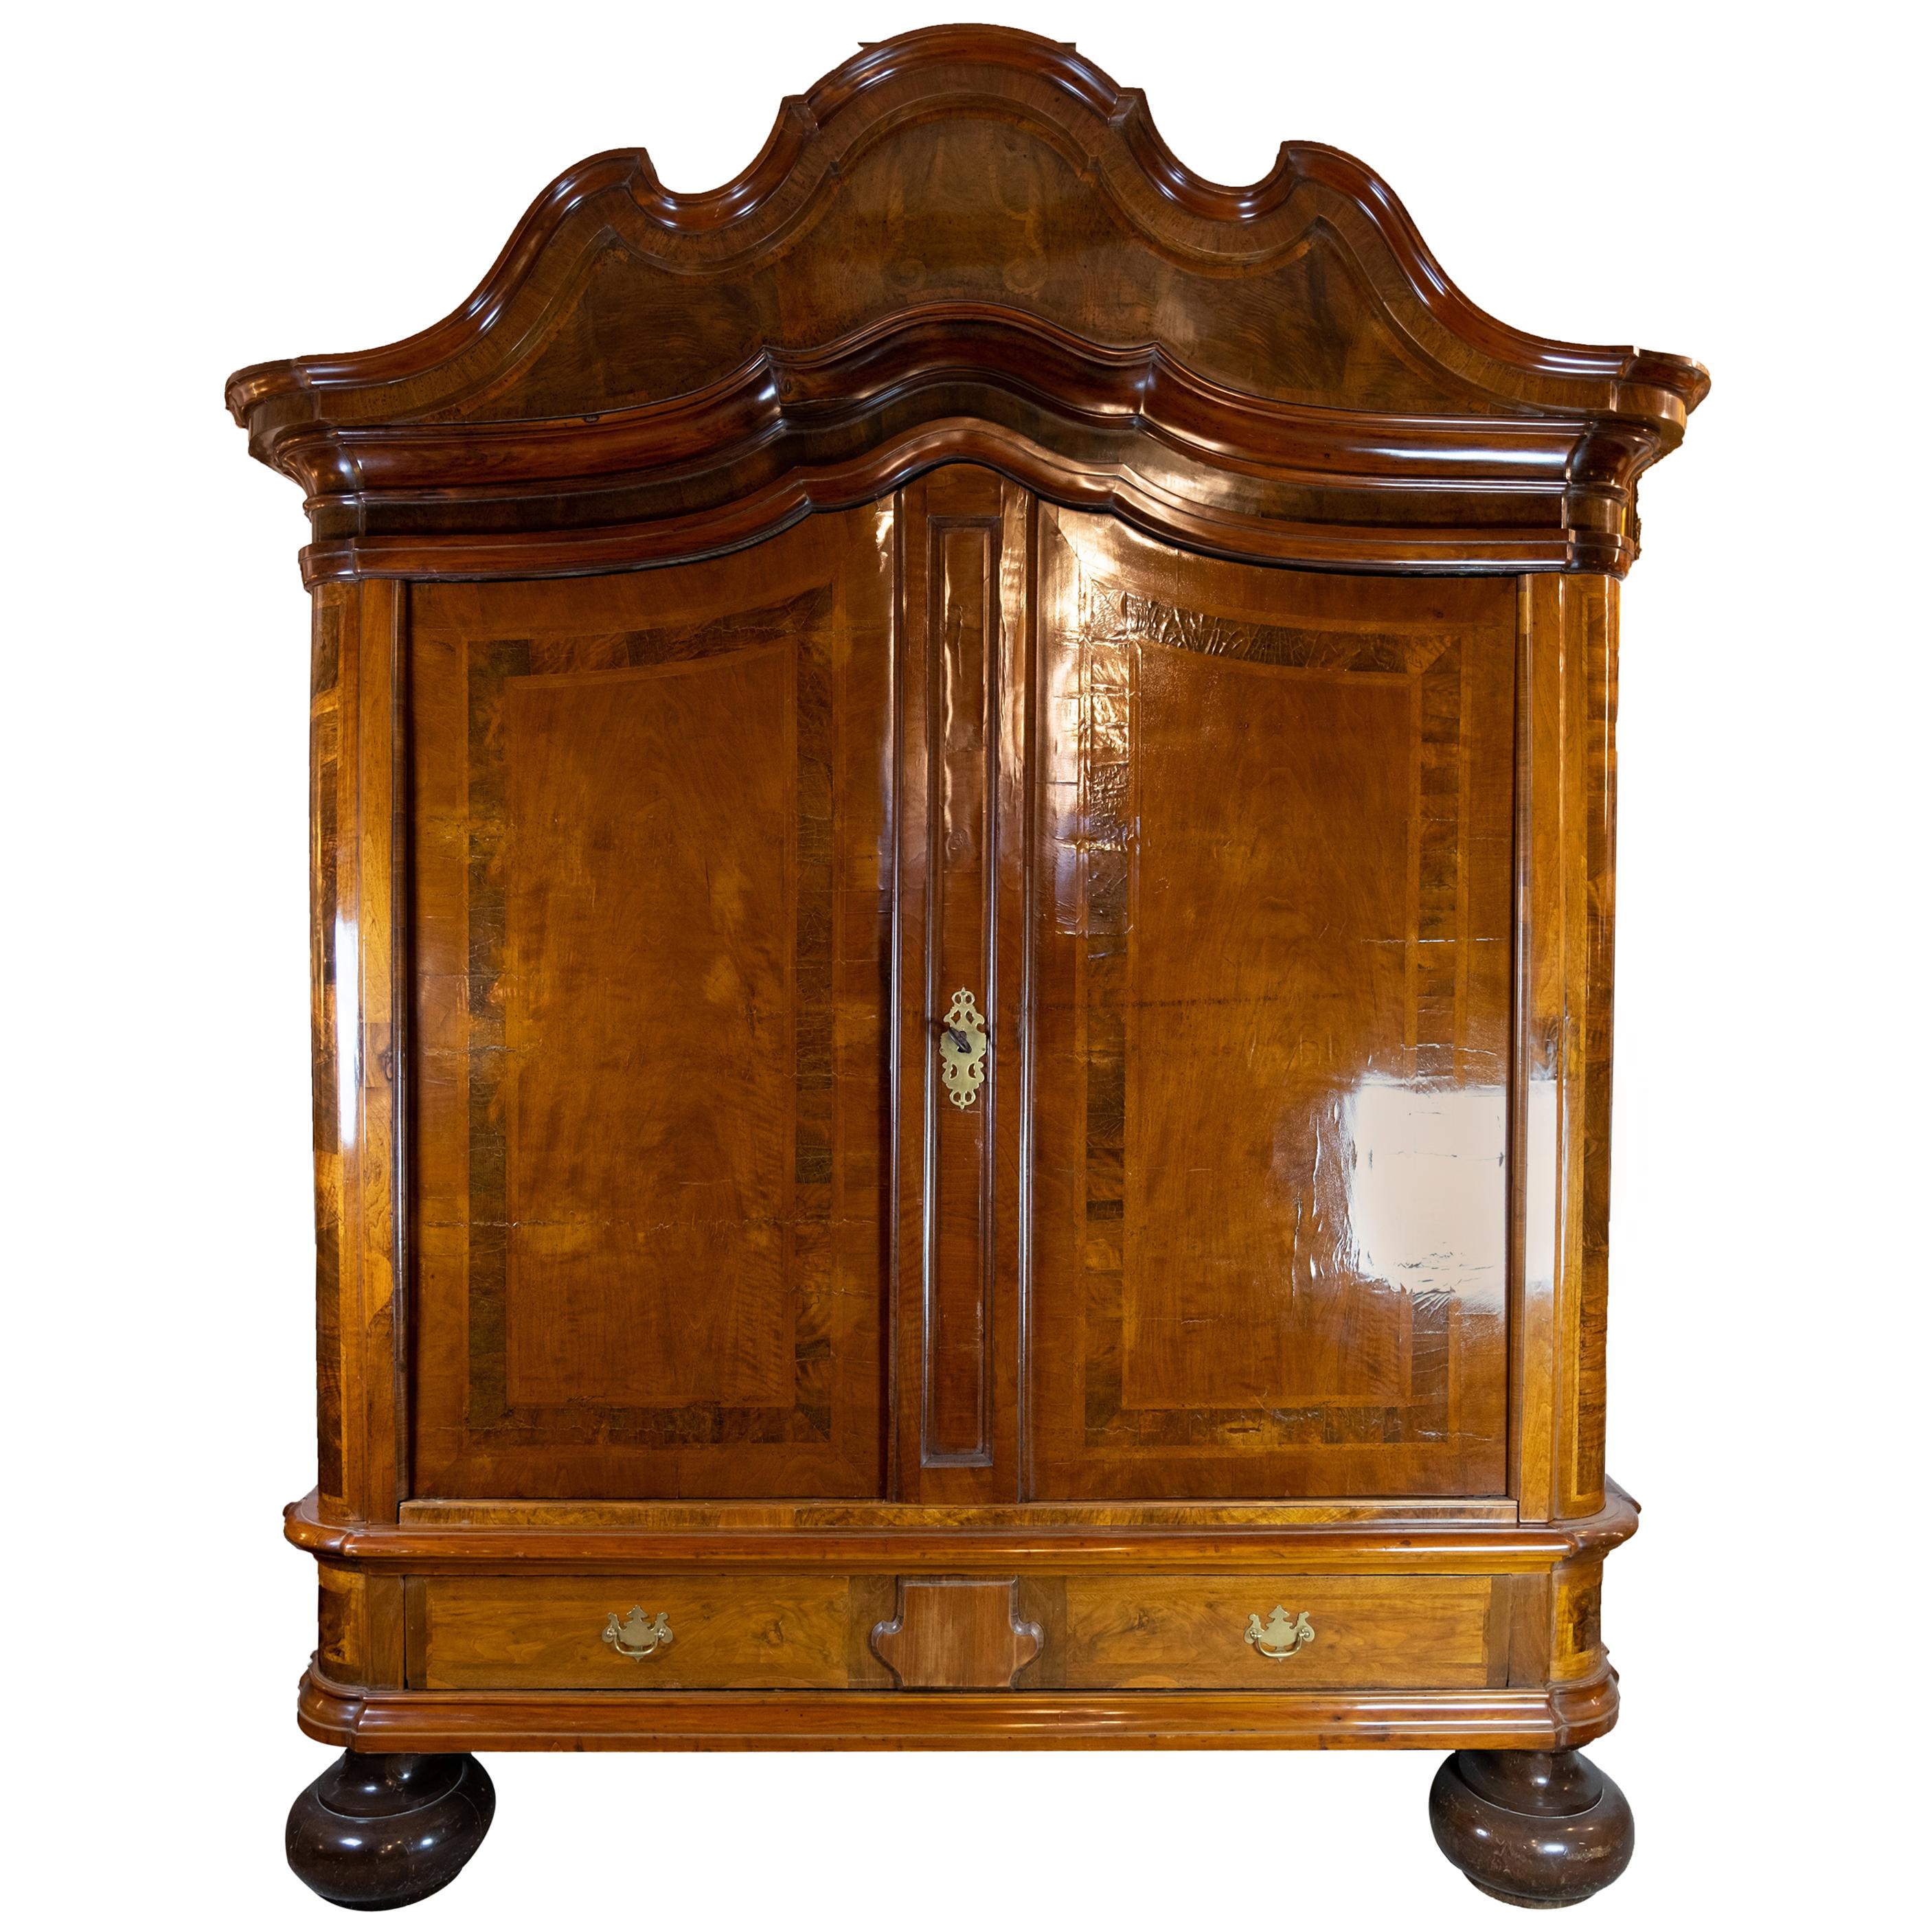 Northern German Baroque Cabinet of Walnut and Oak from circa 1730